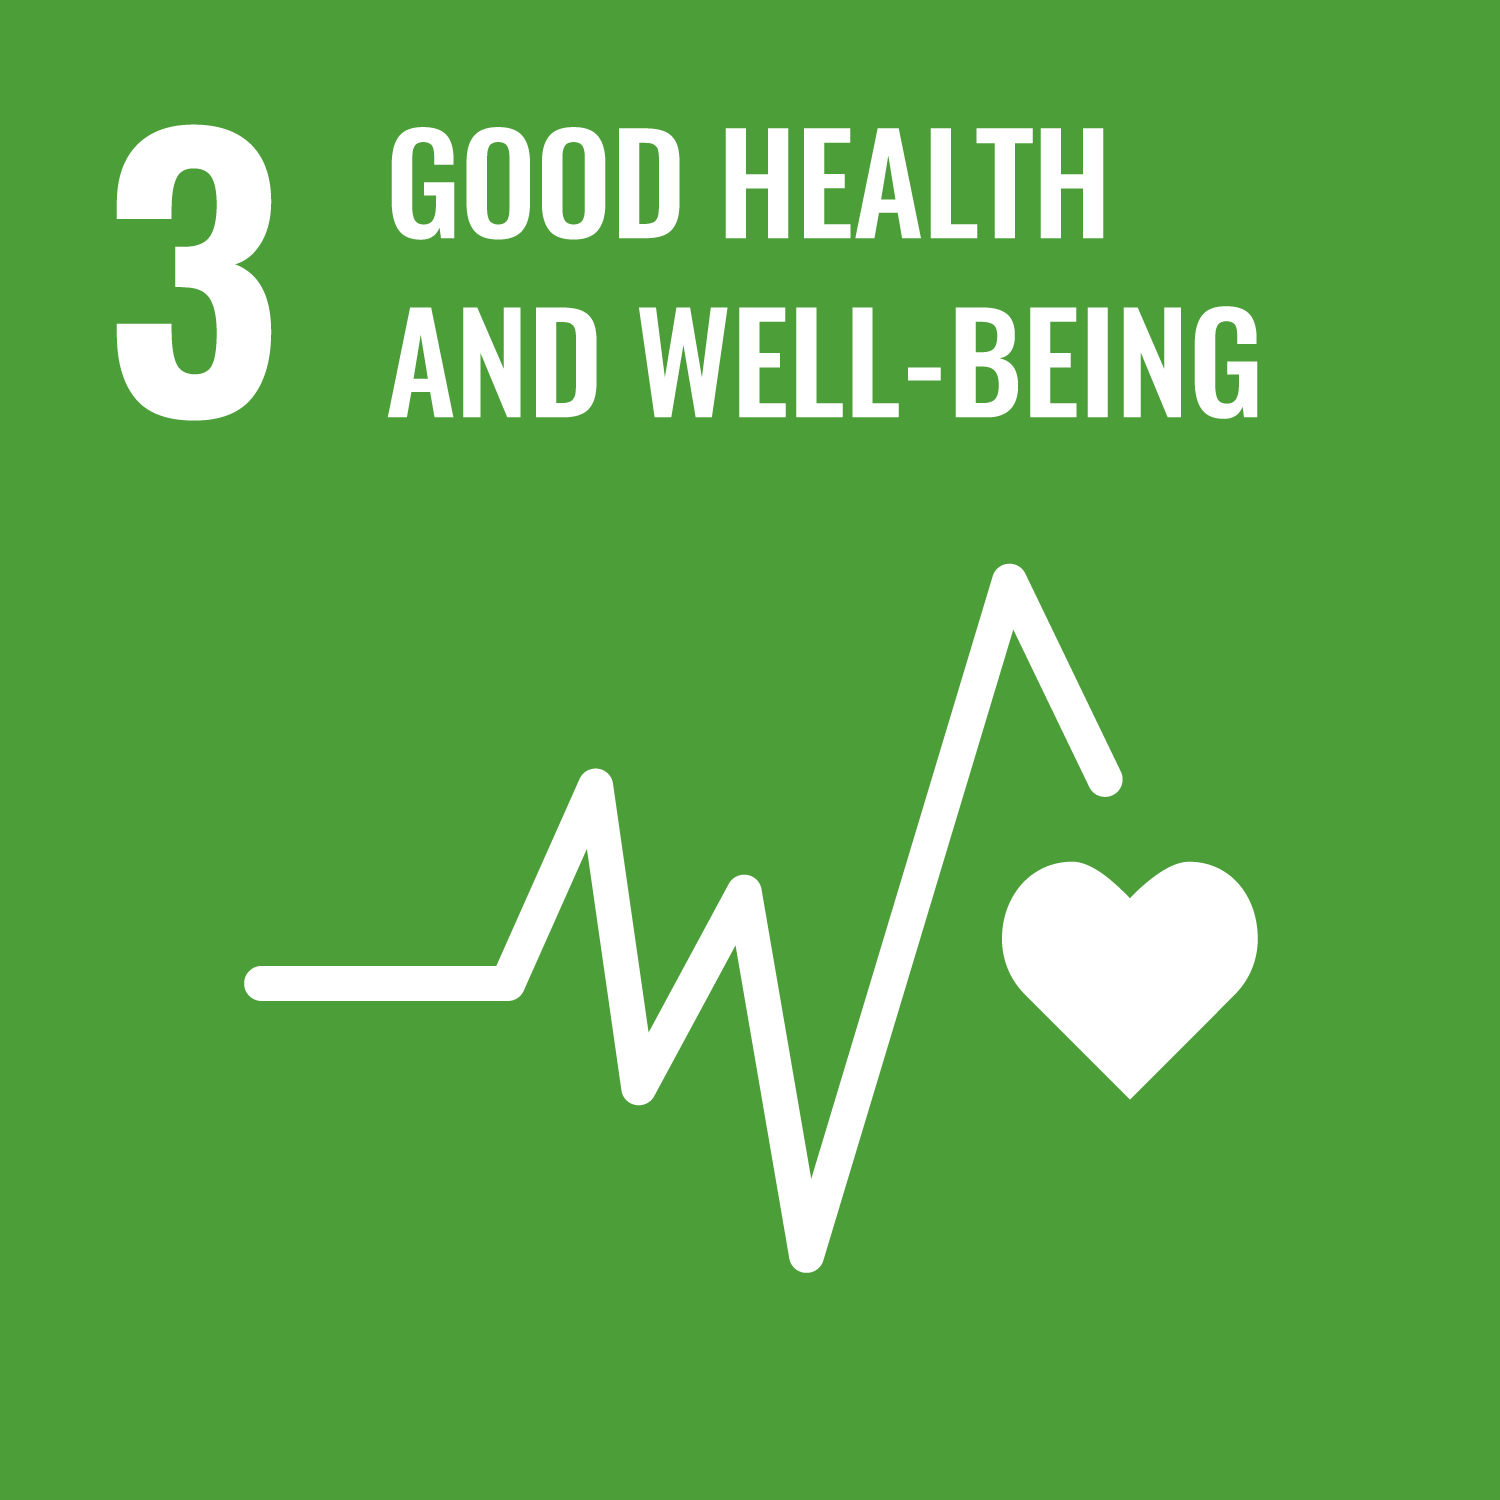 Related UN Sustainable Development Goals icon 3